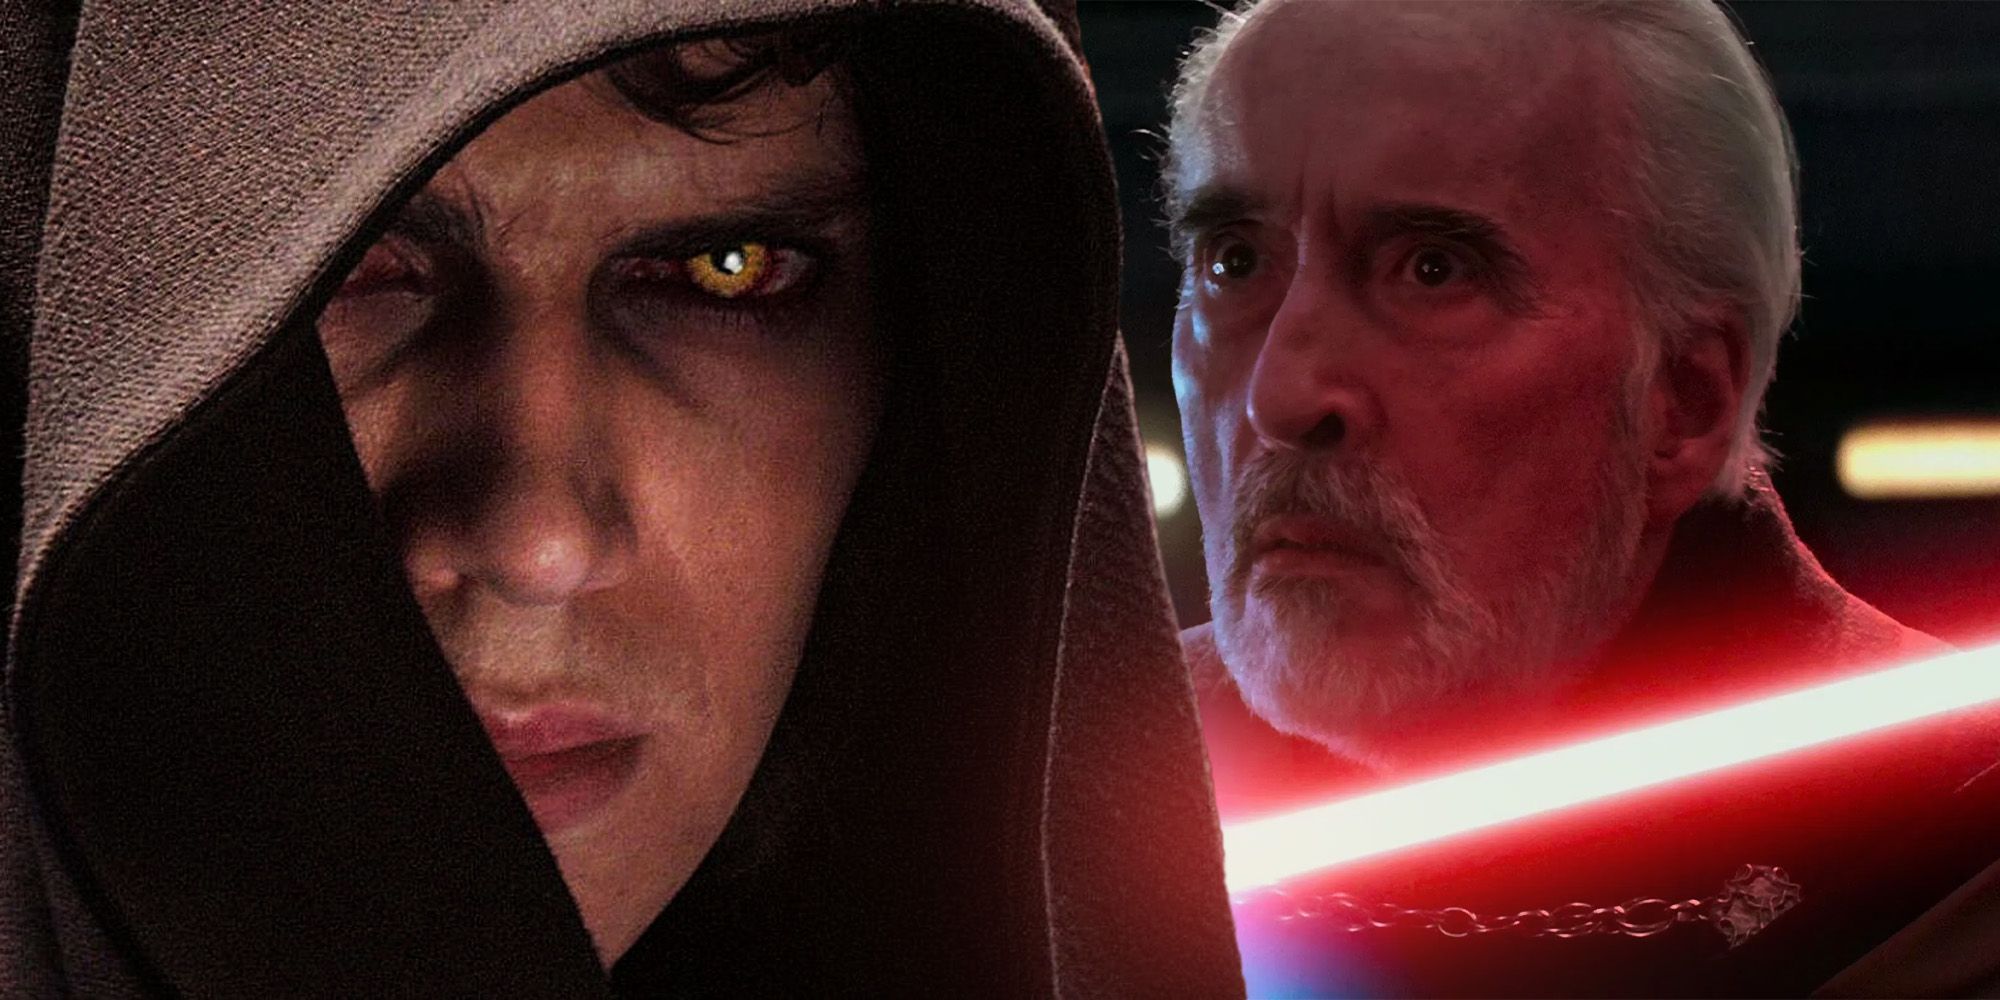 Count Dooku Anakin sith eyes revenge of the sith